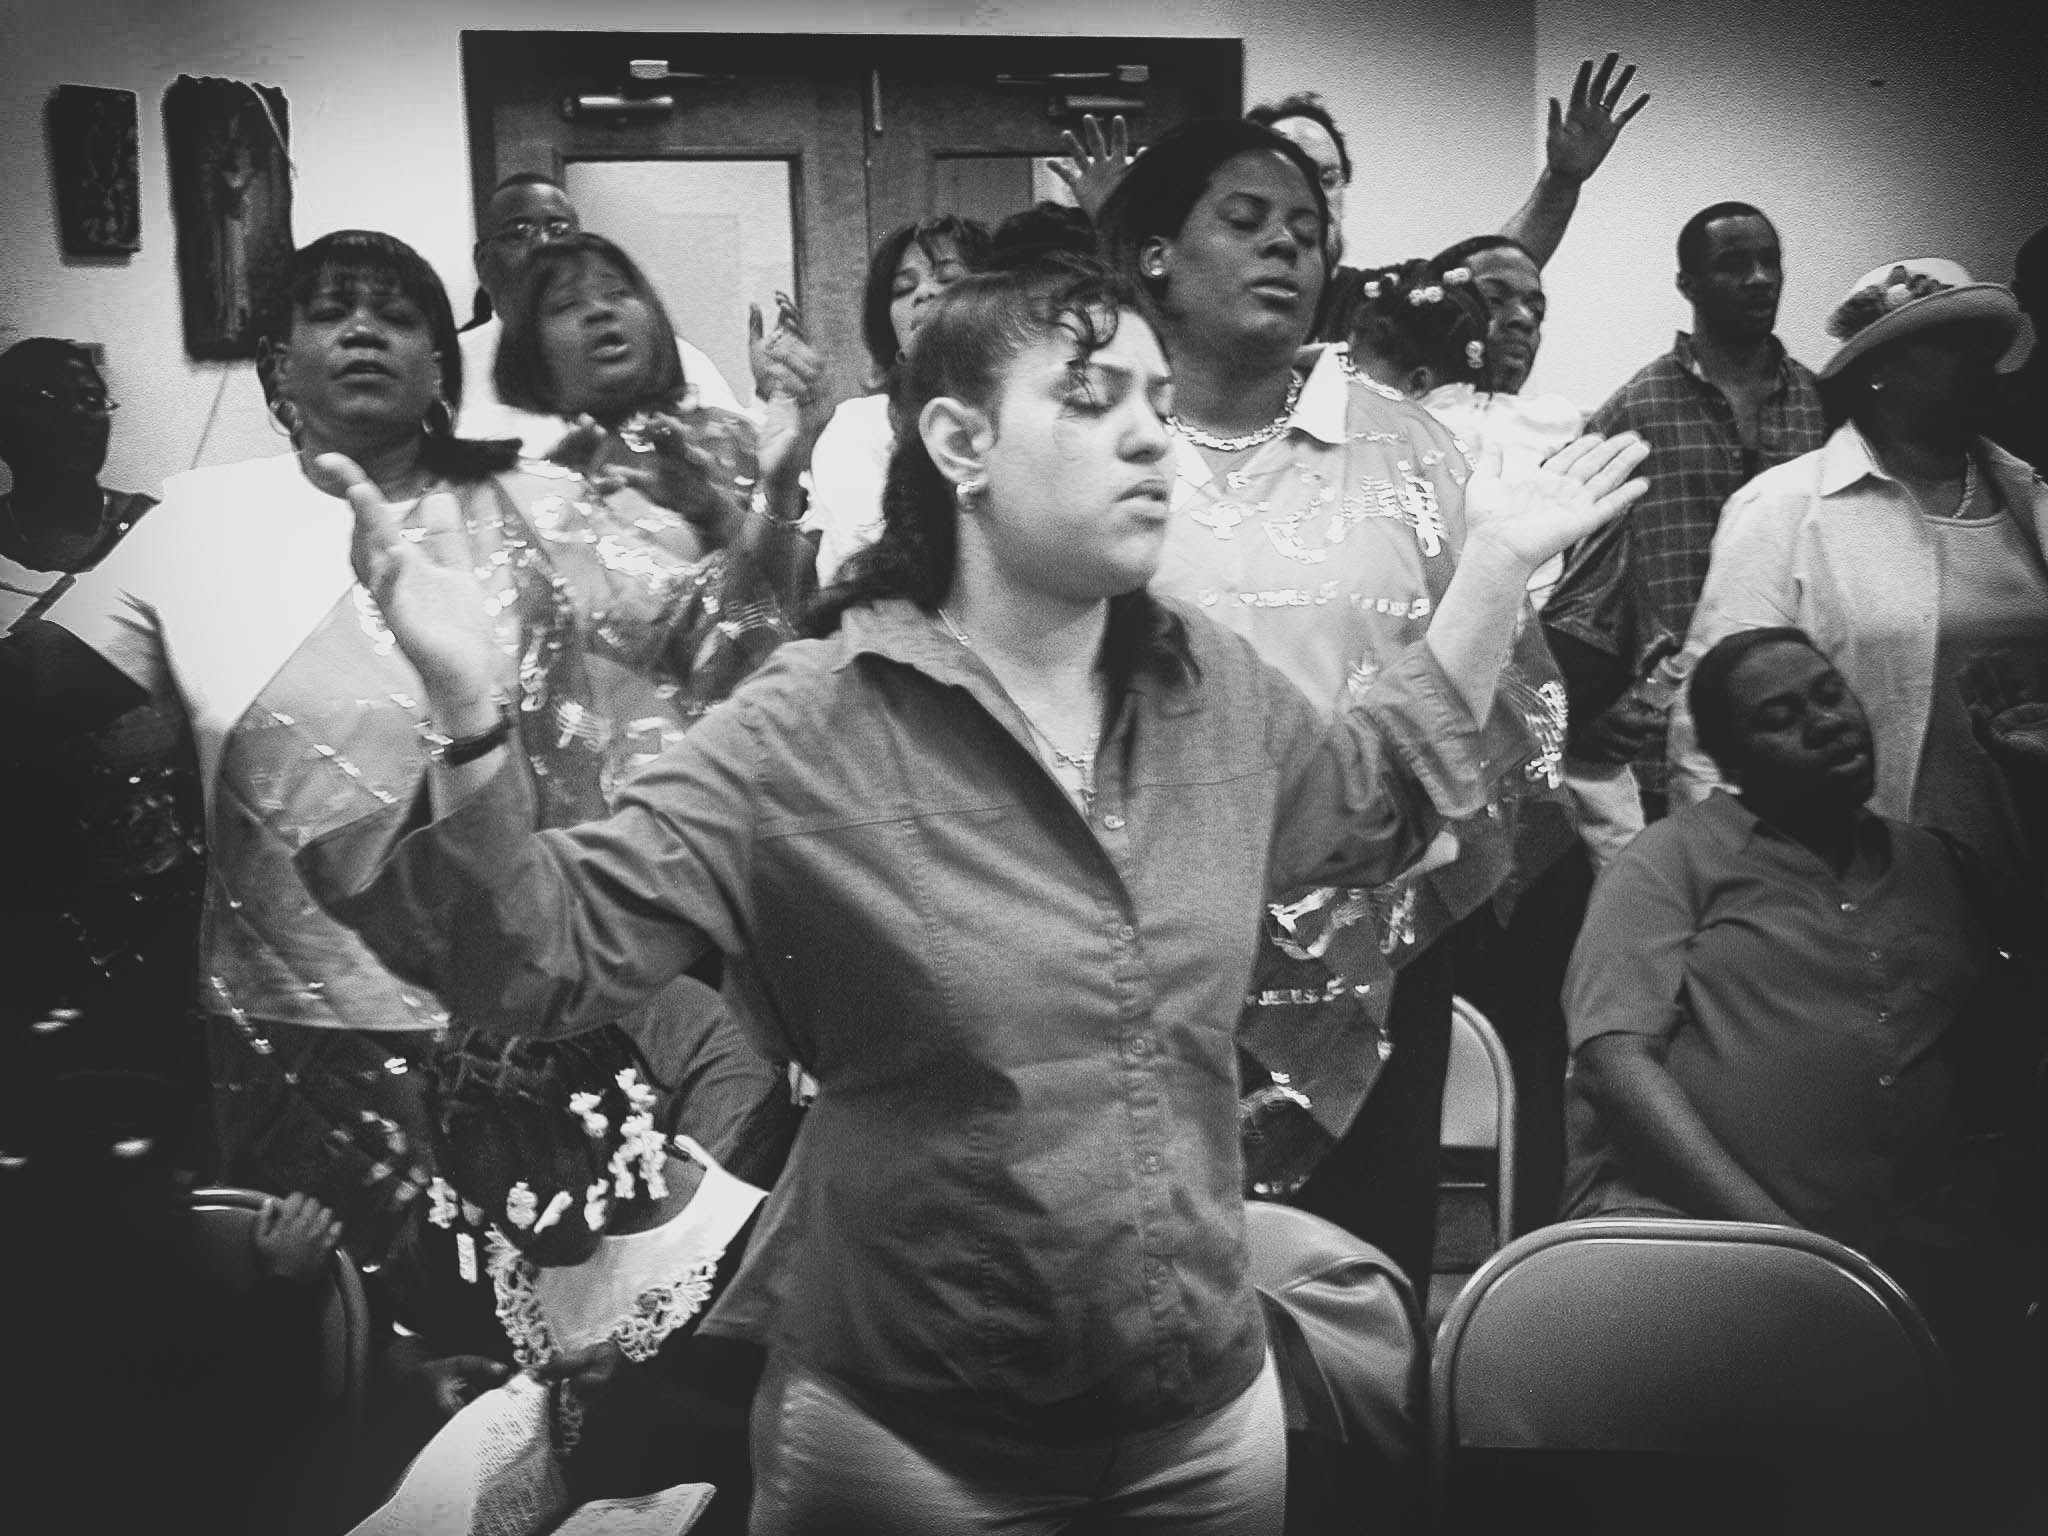 Olympus C3100Z,C3020Z sample photo. Mlk legacy - chicago's bread of life ministries photography